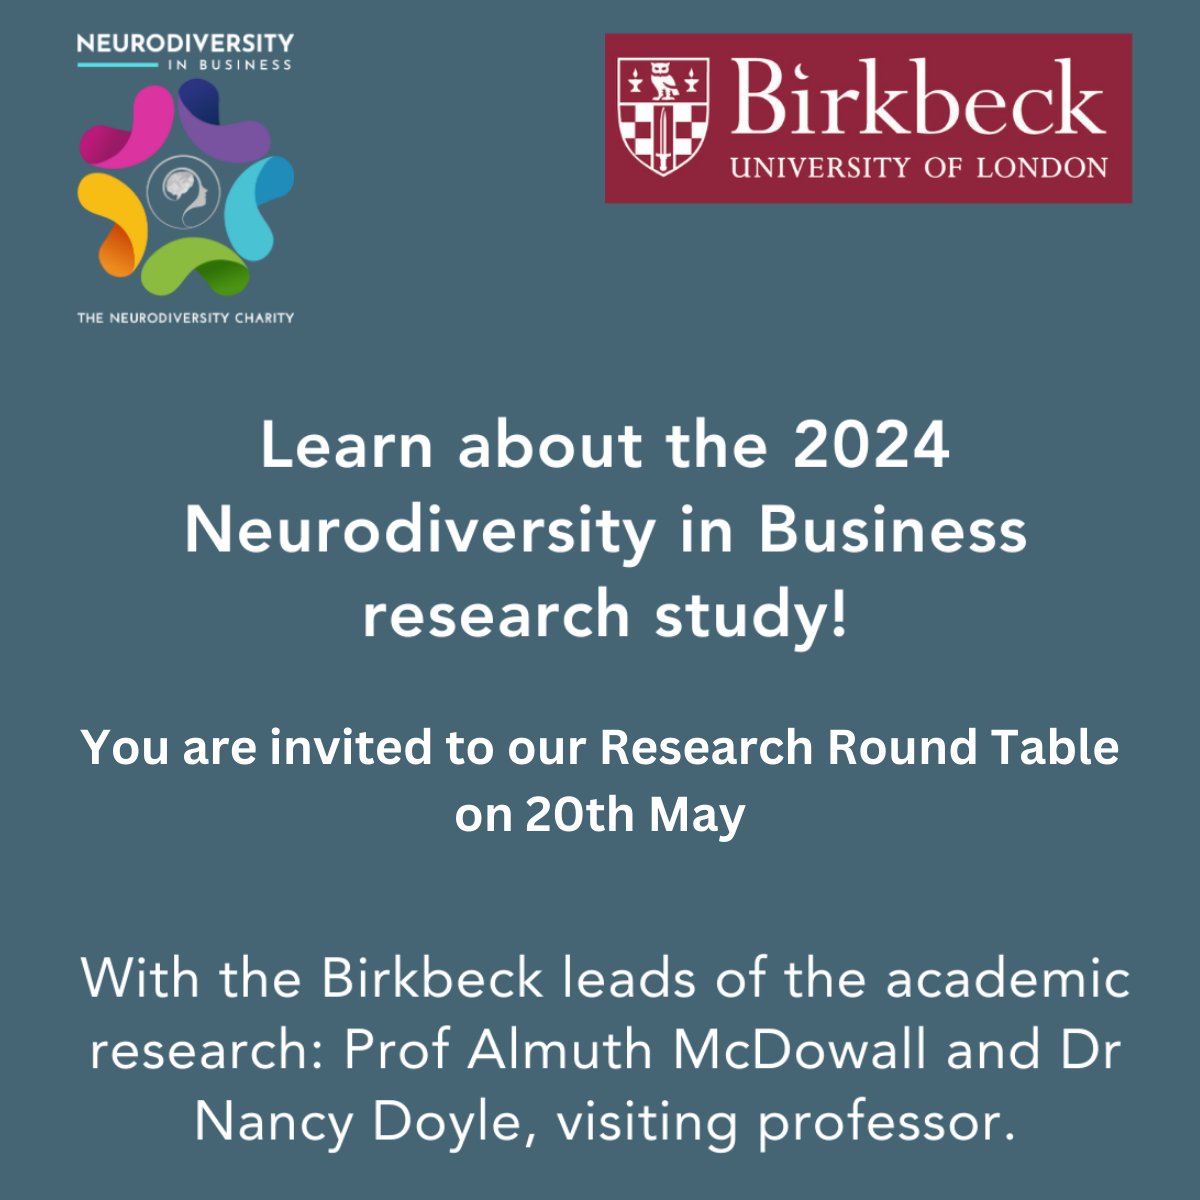 Learn about the second NiB and Work research, undertaken by Prof Almuth McDowell and Dr Nancy Doyle, visiting professor, Birkbeck University at our Roundtable on 20 May. Link: bit.ly/NiB-Research-R… #Neurodiversity #NeurodiversityInBusiness #CollaborateForImpact